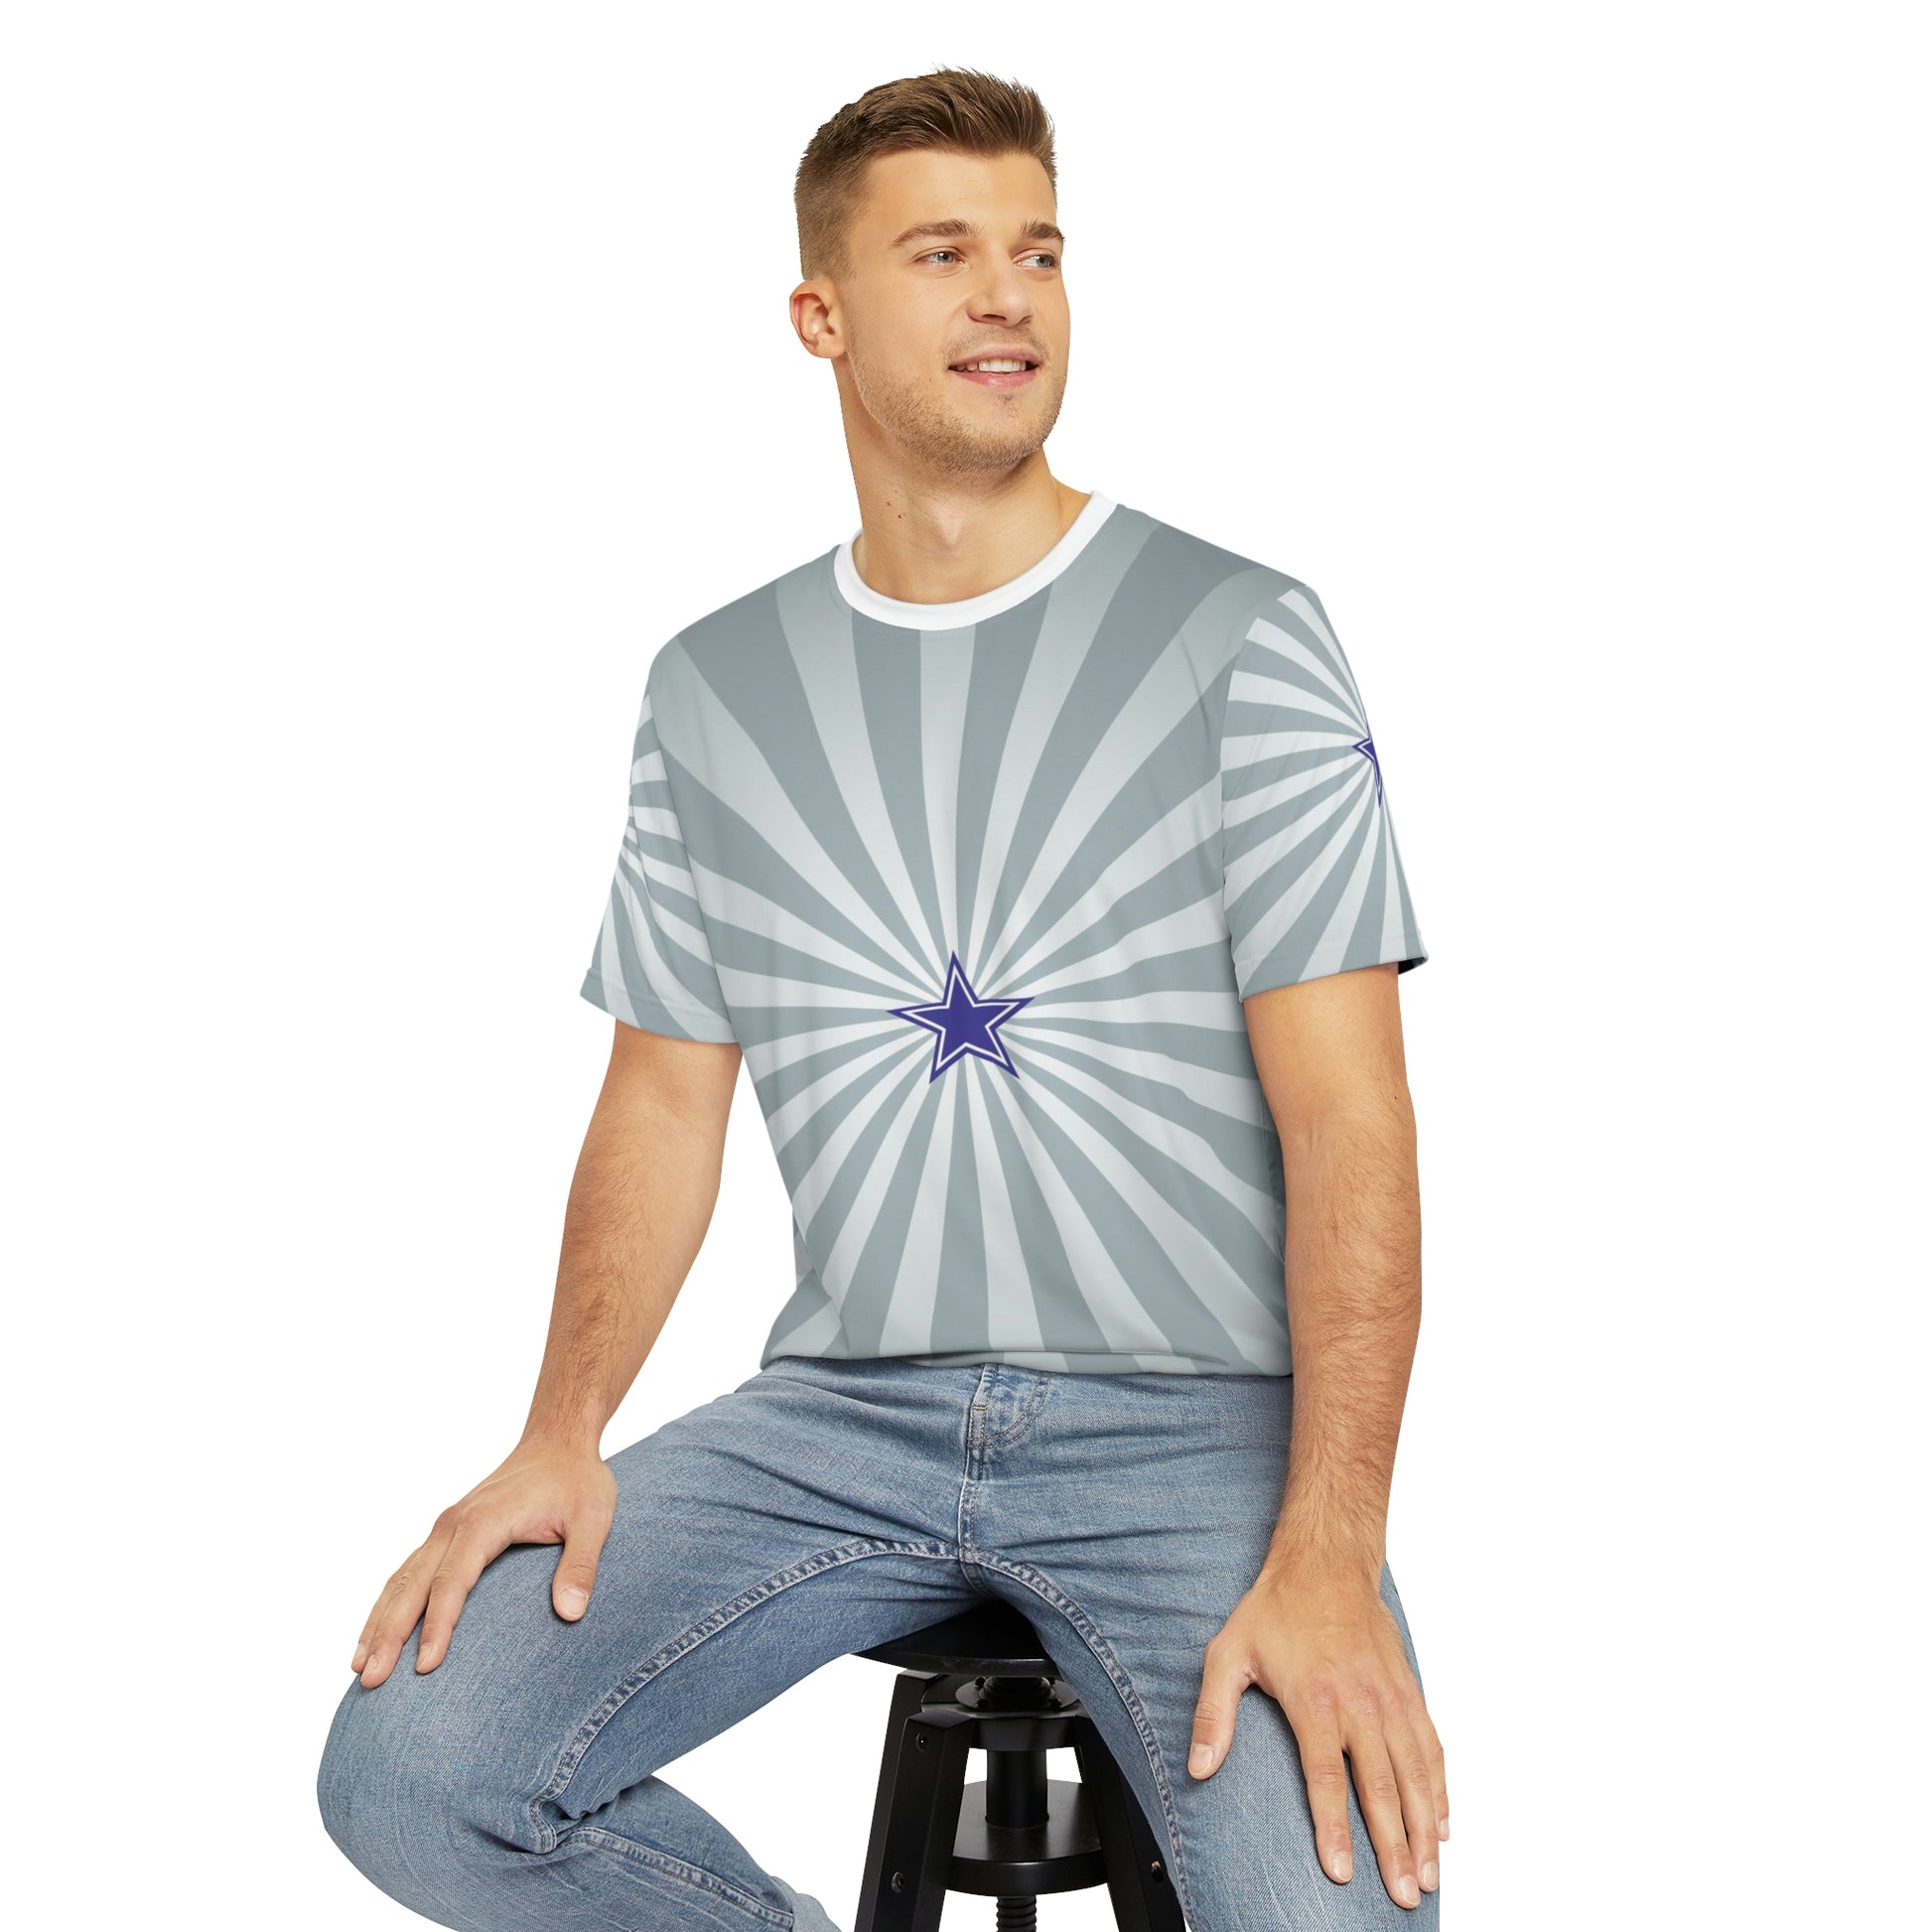 Geotrott NFL Dallas Cowboys Men's Polyester All Over Print Tee T-Shirt-All Over Prints-Geotrott